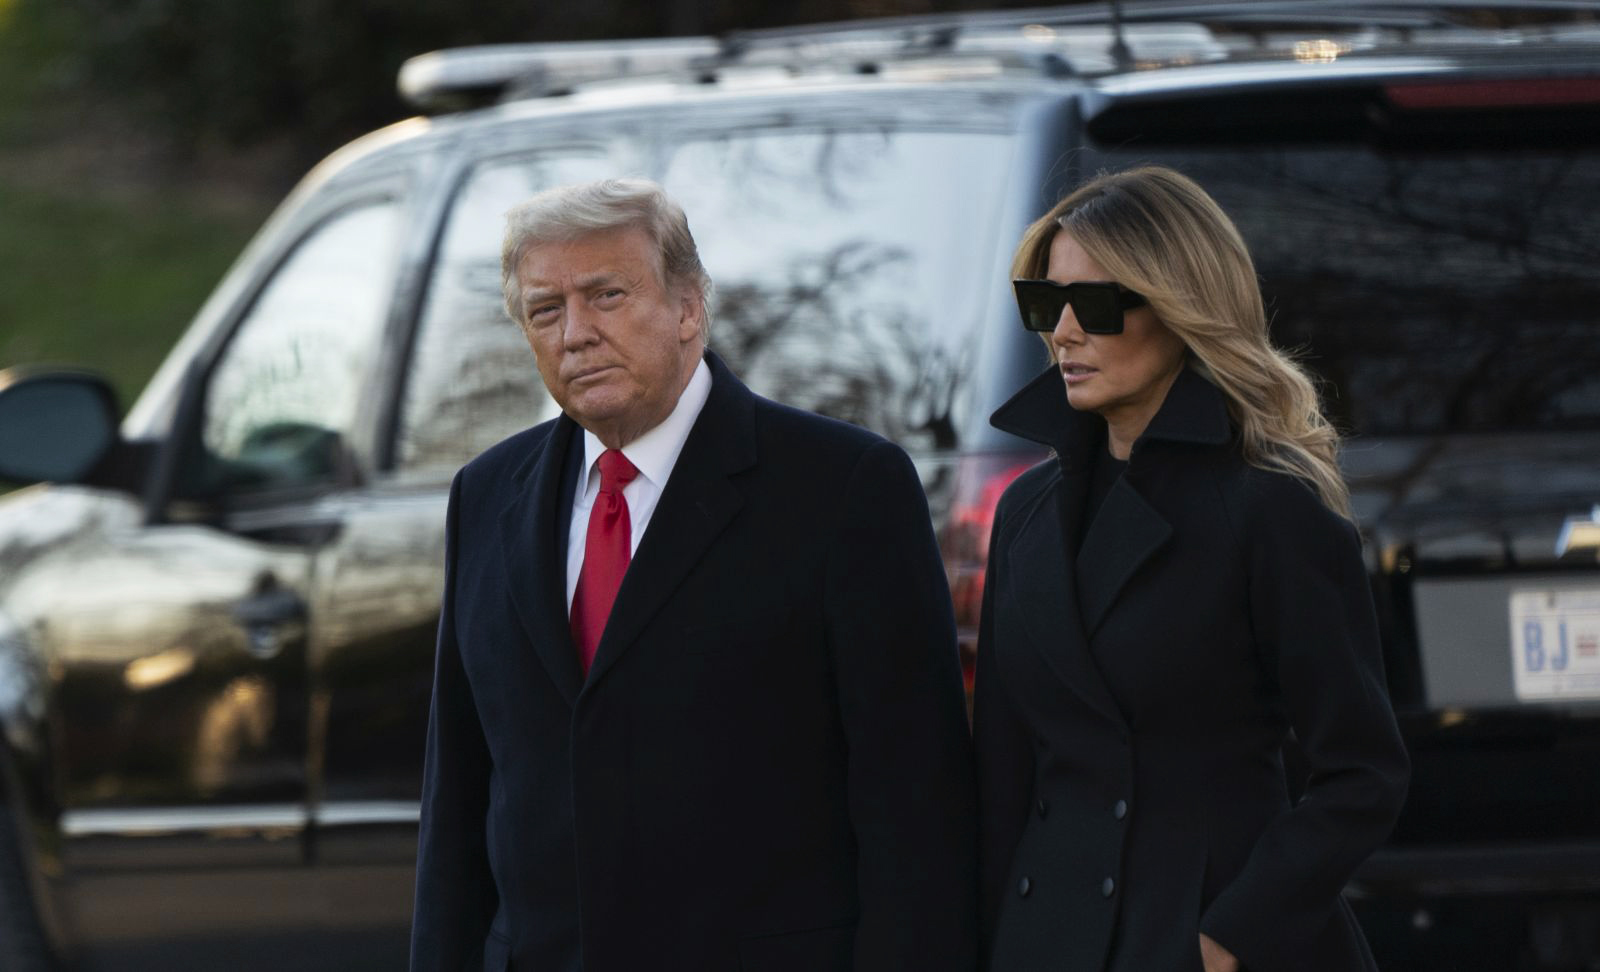 epa08901877 US President Donald J. Trump and First lady Melania Trump (R) depart the White House, in Washington, DC, USA, 23 December 2020, headed out to Mar-a-Lago in Palm Beach, Florida.  EPA/Chris Kleponis / POOL